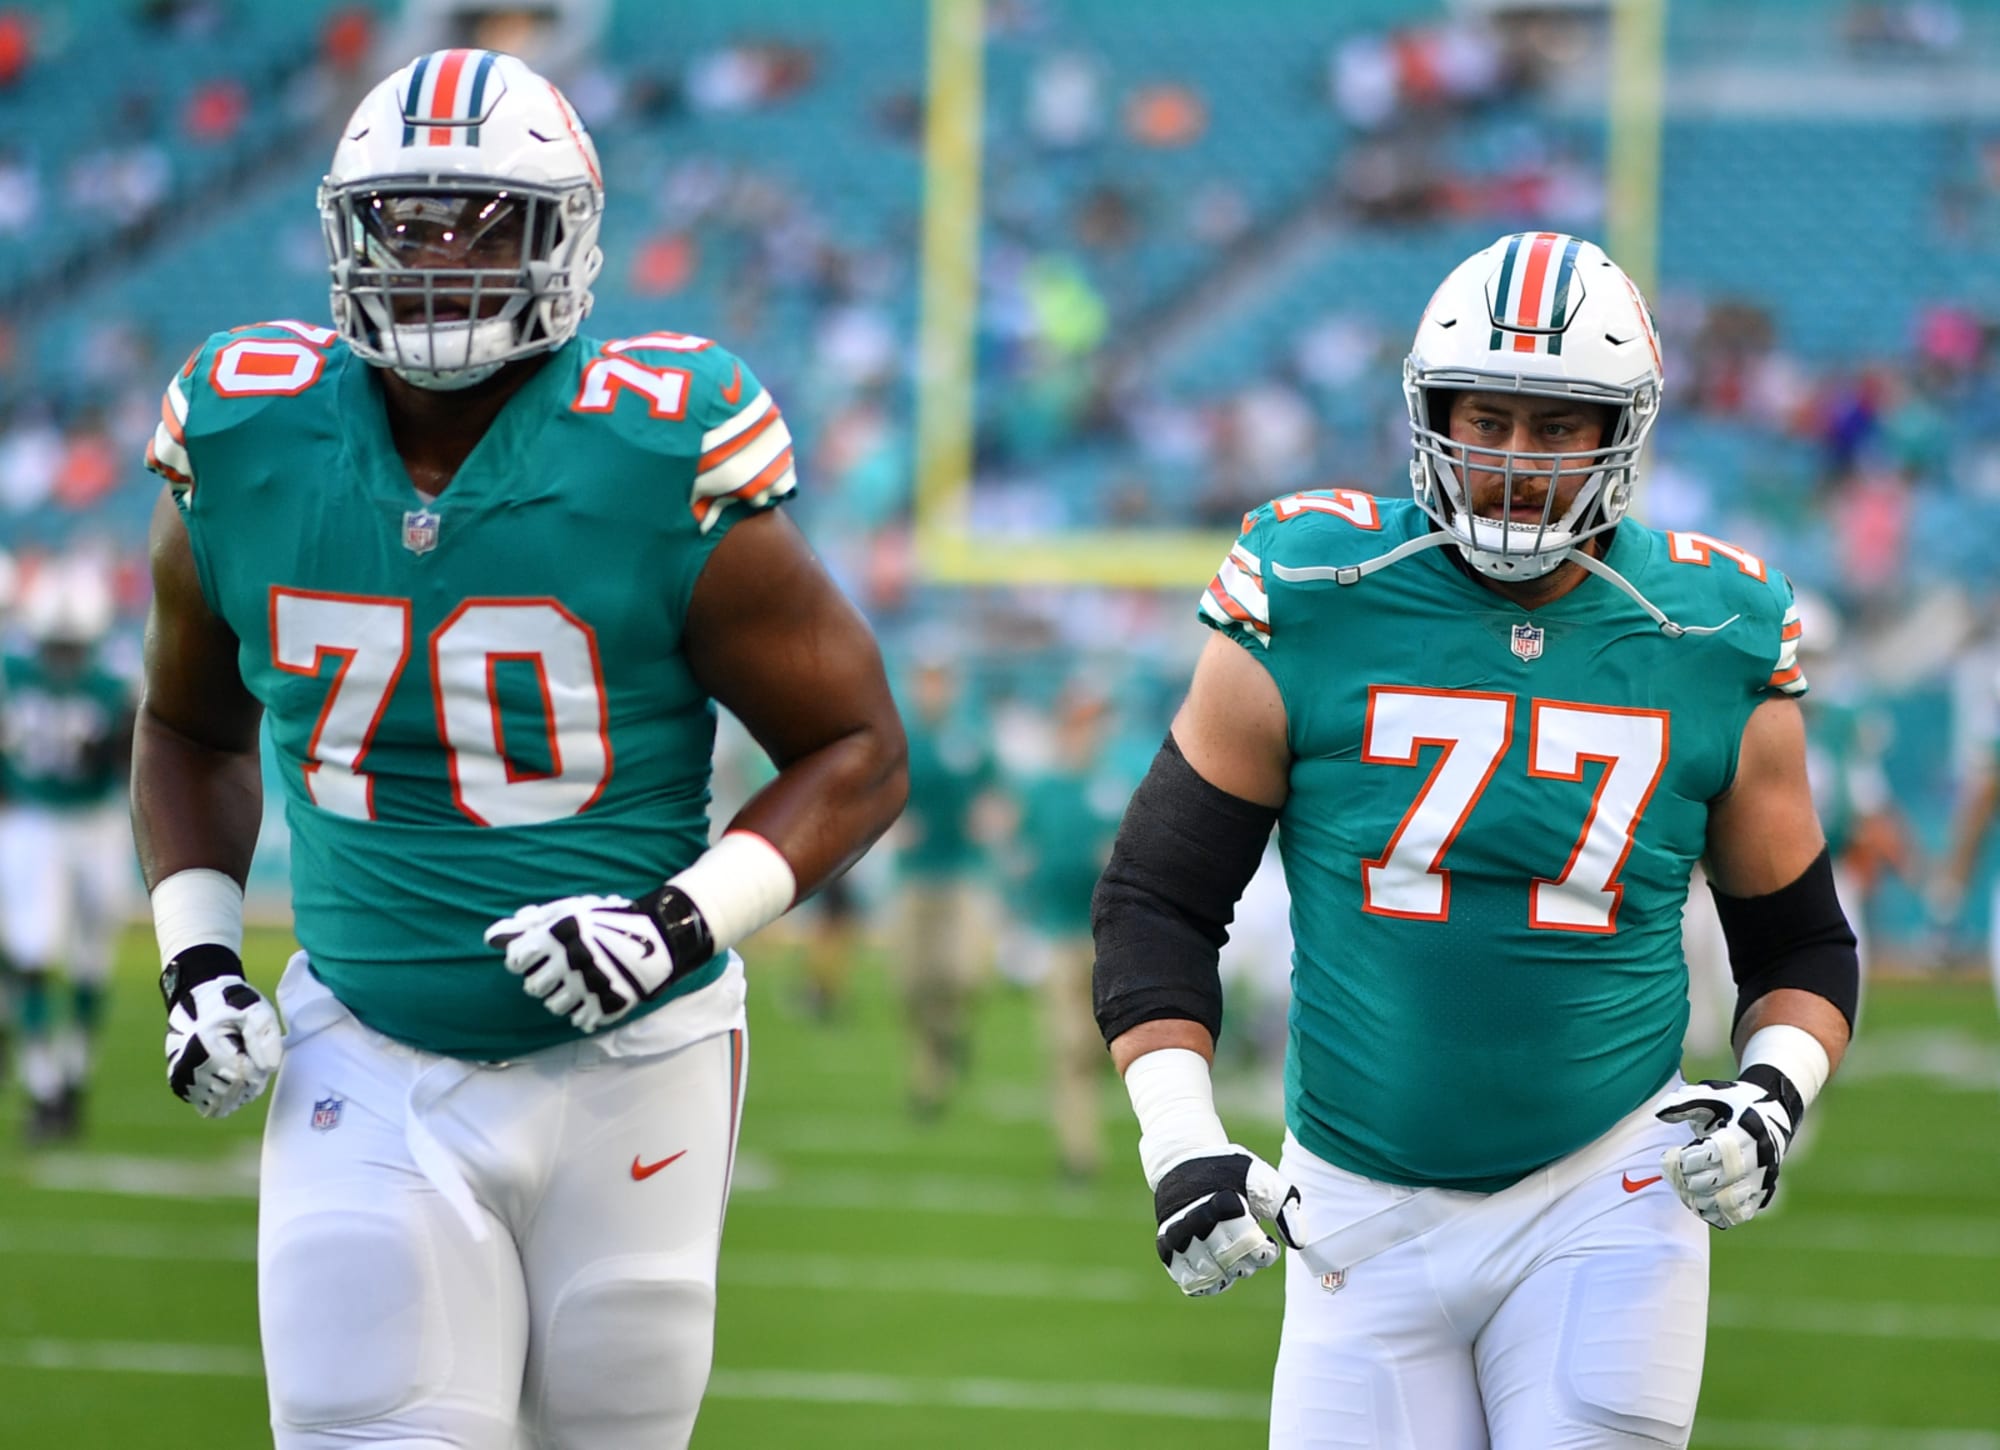 The Miami Dolphins offensive line ranked by best player to worst